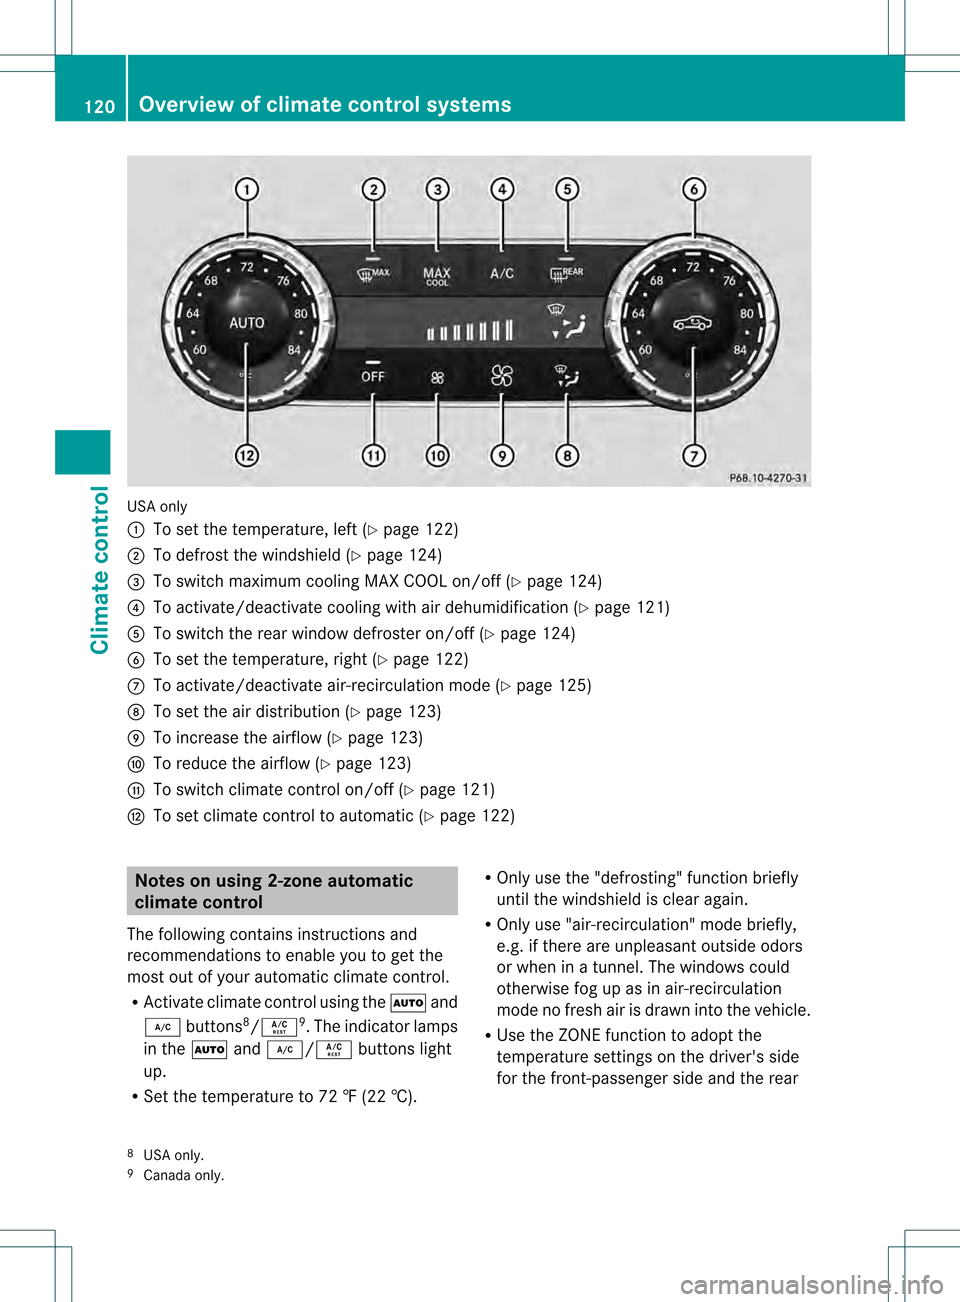 MERCEDES-BENZ SLK350 2012 R172 Owners Manual USA only
0002
To set the temperature, left (Y page 122)
0003 To defrost the windshield (Y page 124)
0023 To switch maximum cooling MAX COOL on/off (Y page 124)
0022 To activate/deactivate cooling with